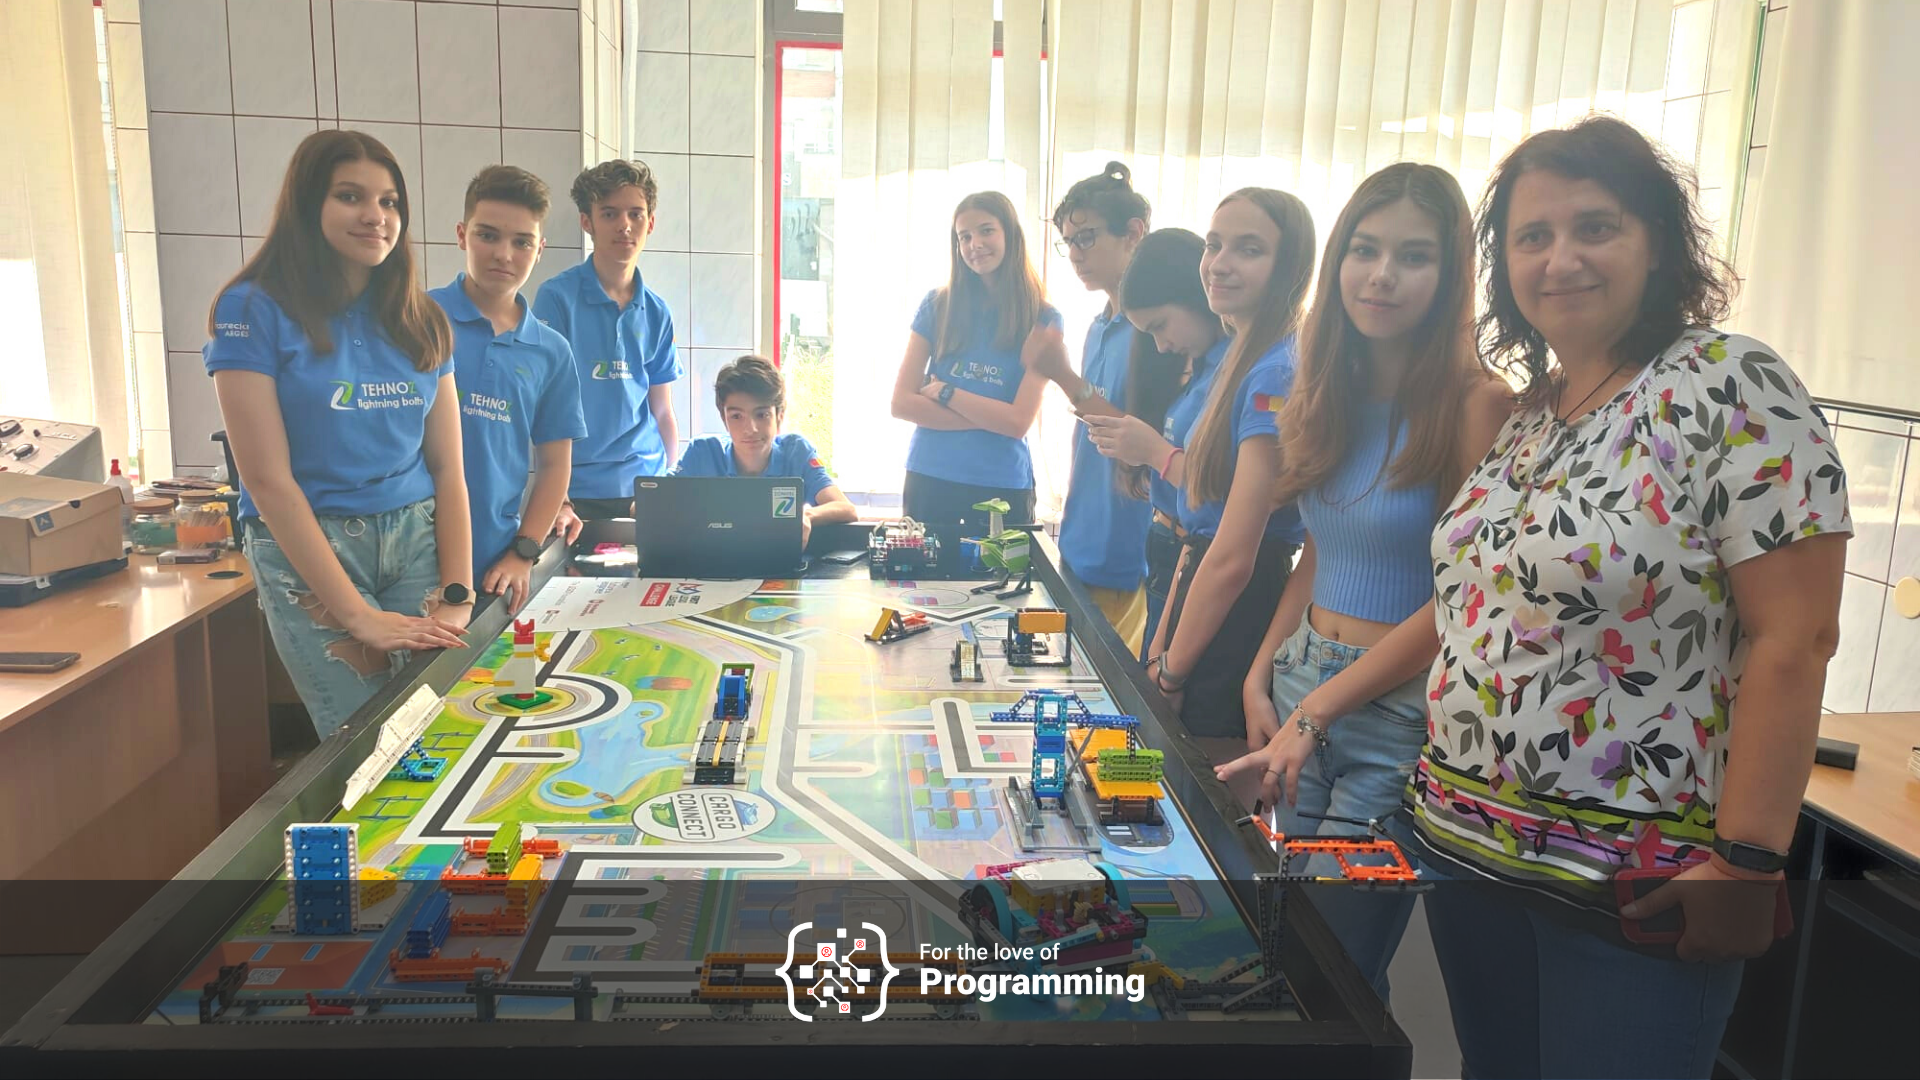 Roweb supports the development of local educational projects by sponsoring  the robotics team at the World Championships in Brazil –